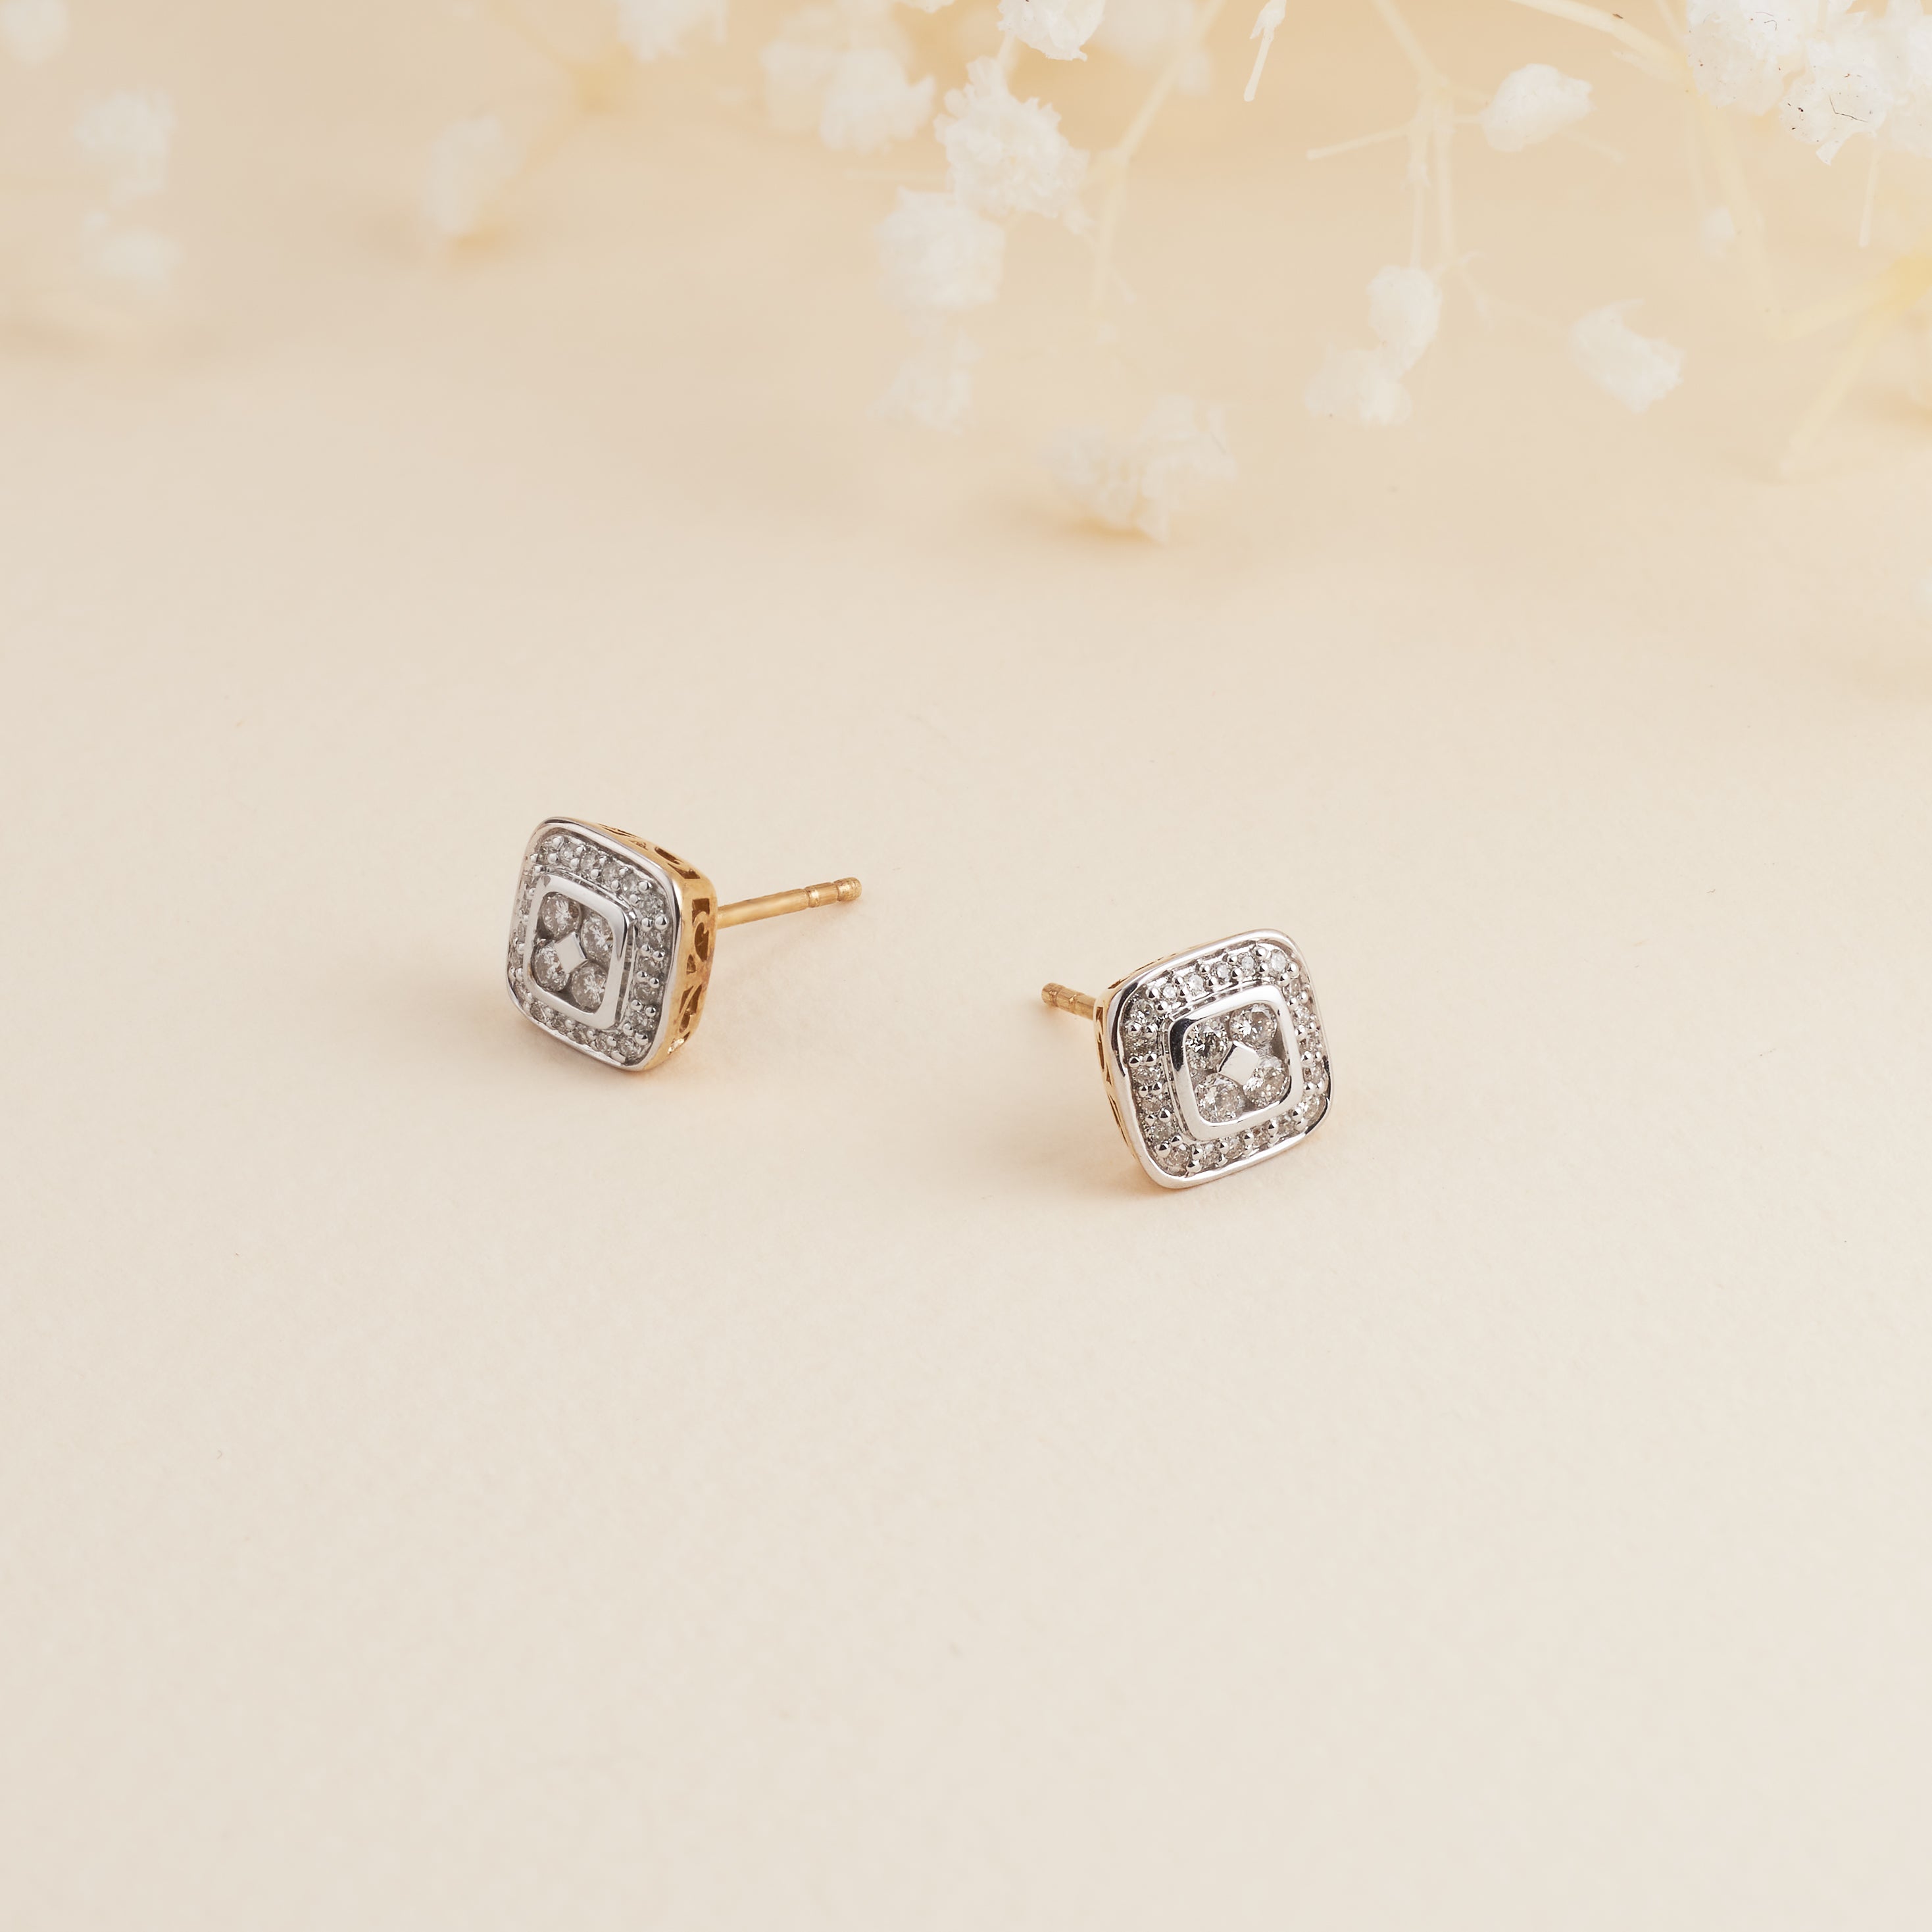 Faith Sterling Silver Sterling Silver CZ Square Halo Stud Earrings 8x8mm   Jewellery from Faith Jewellers UK